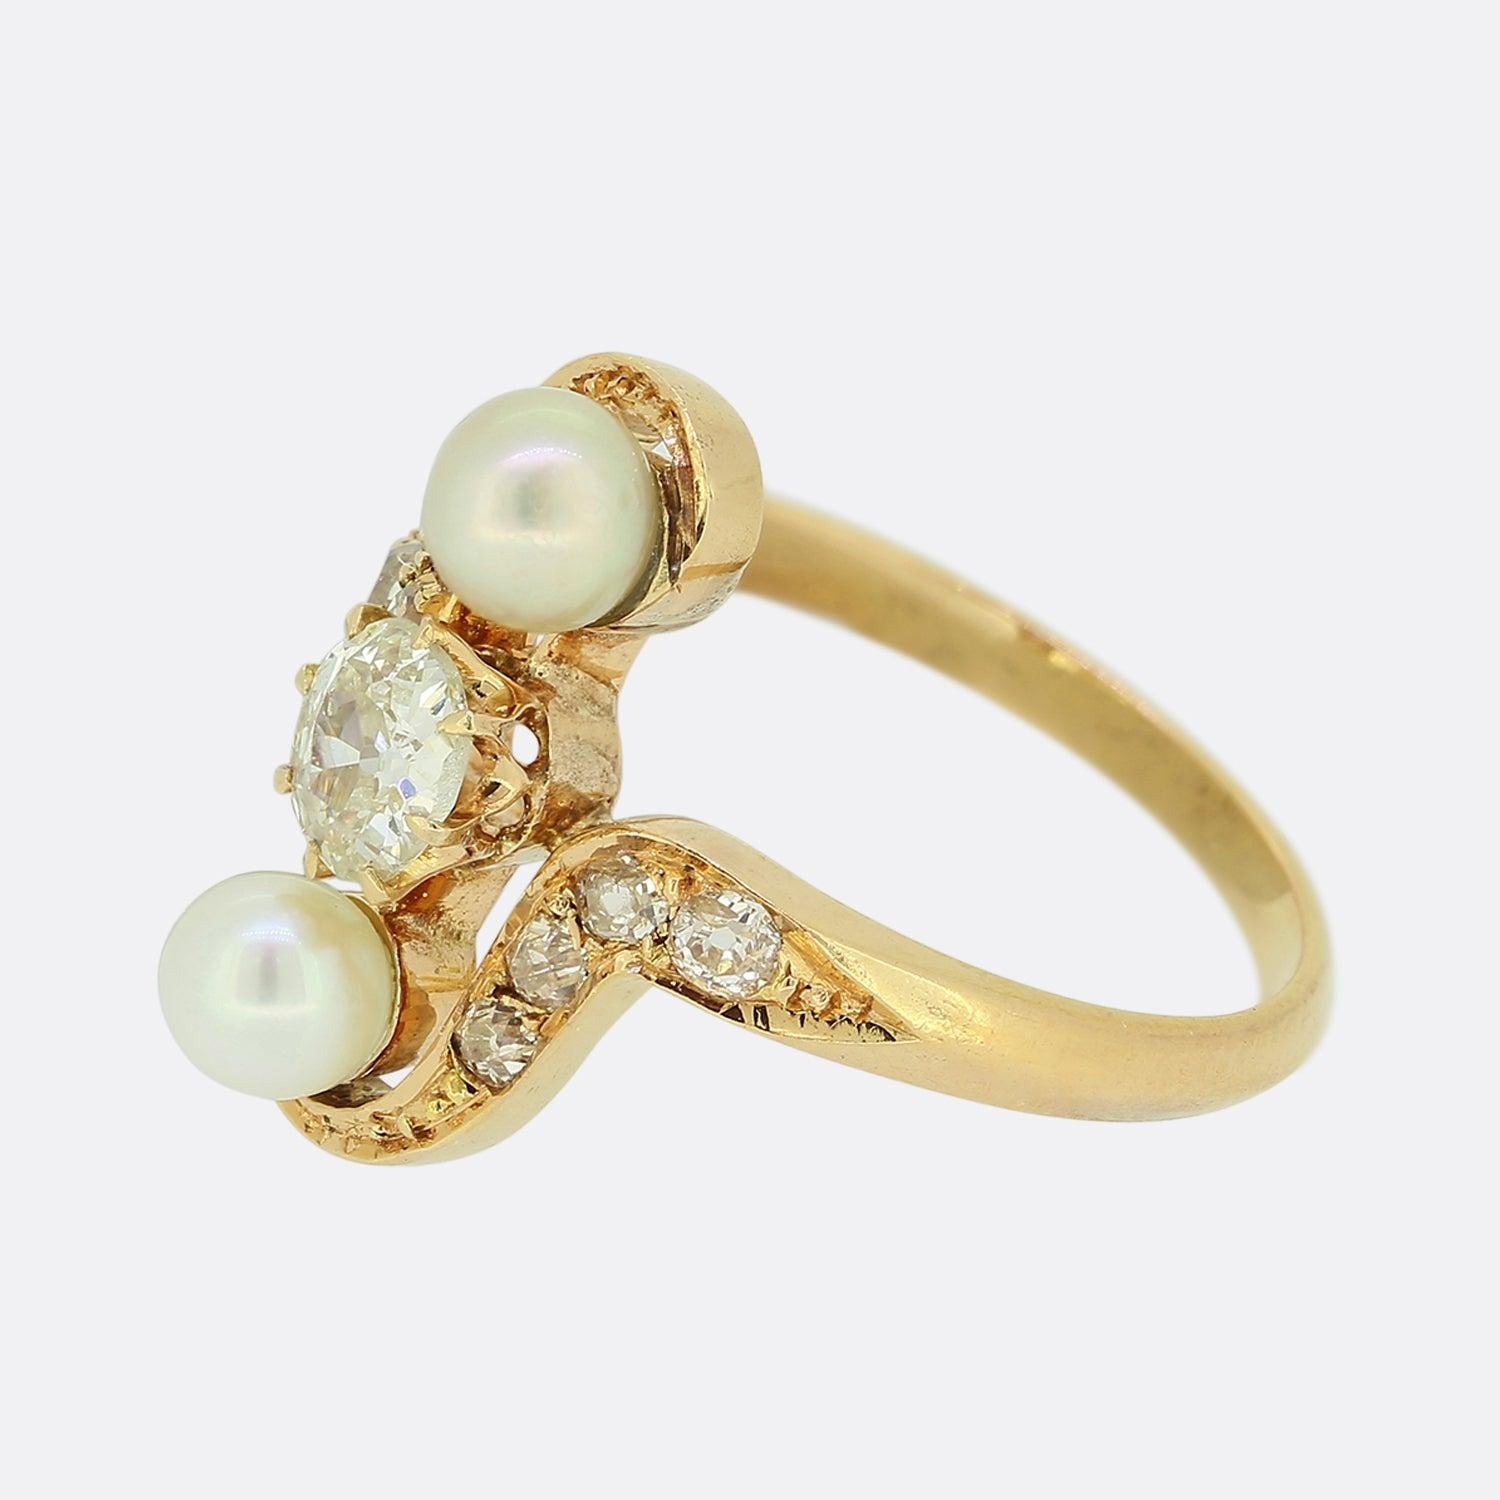 Here we have a charming pearl and diamond ring dating back to the Belle Époque era. A single round faceted old cut diamond has been claw set at the centre of the face amidst a round shaped pearl above and below. The trio sits proud atop a swirling